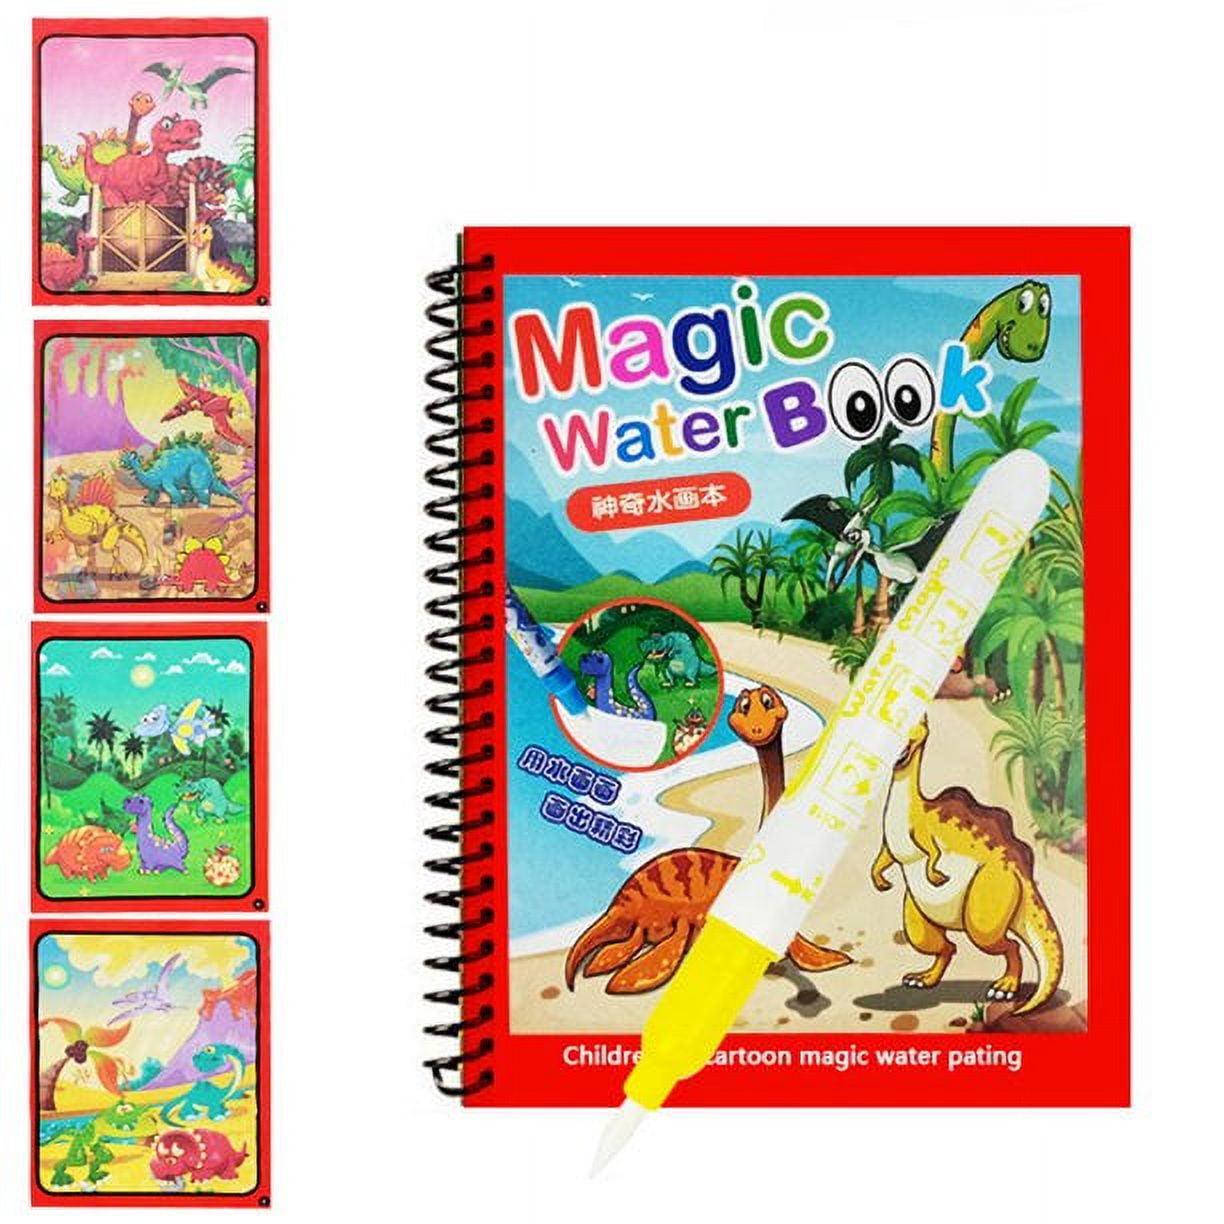 SHELLTON Water Doodle Book Kids Painting Writing Doodle Toy